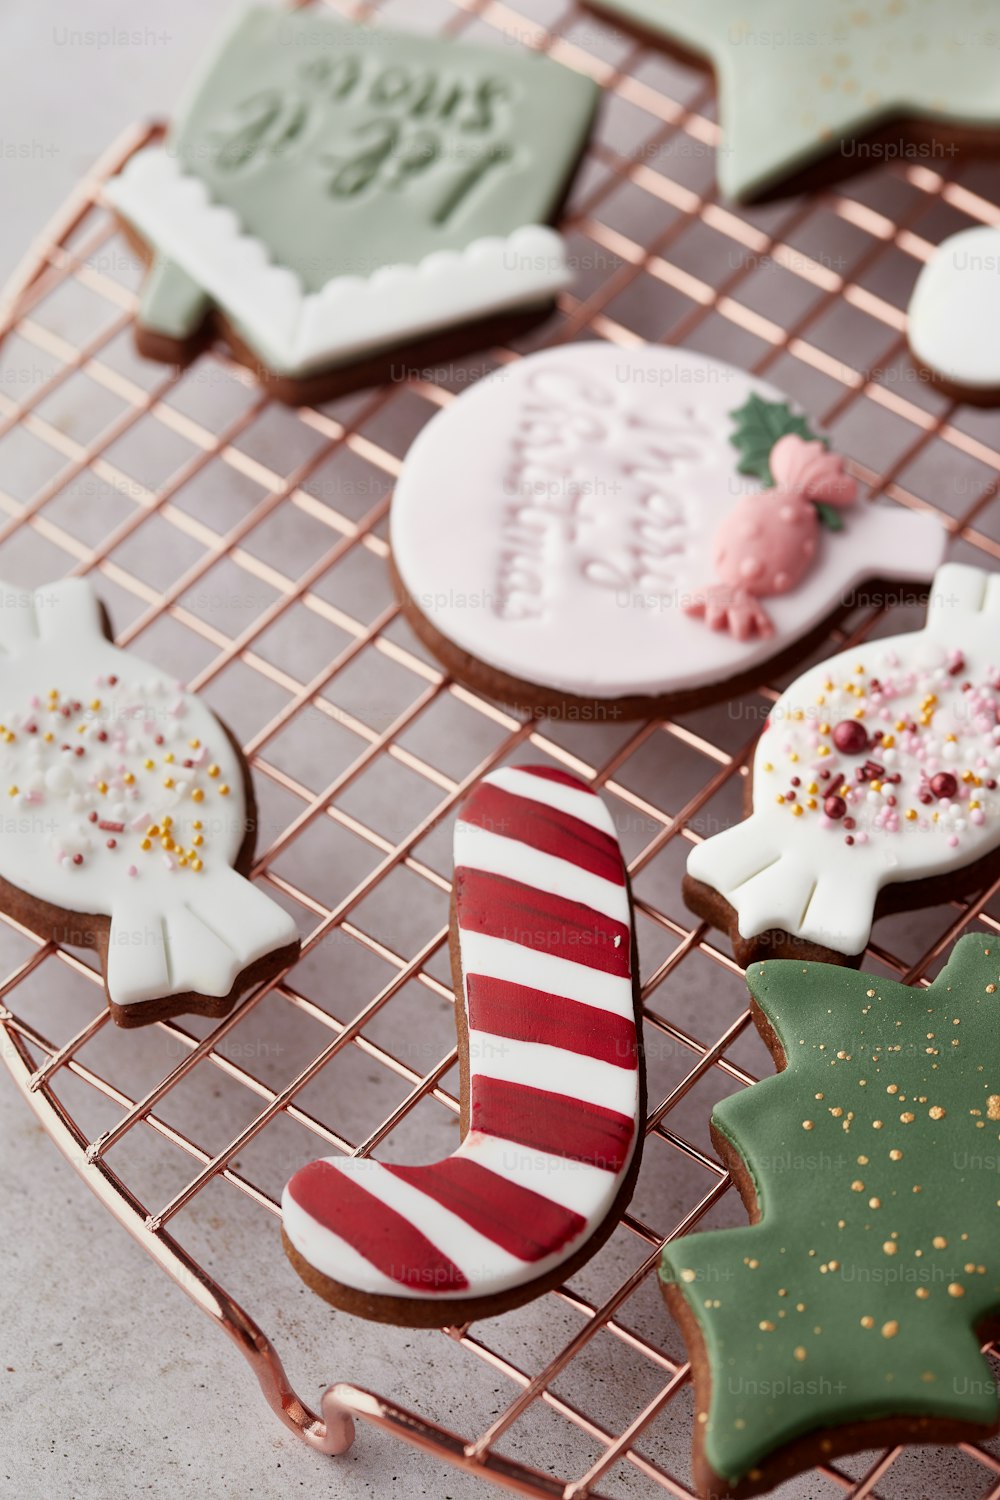 a group of decorated cookies